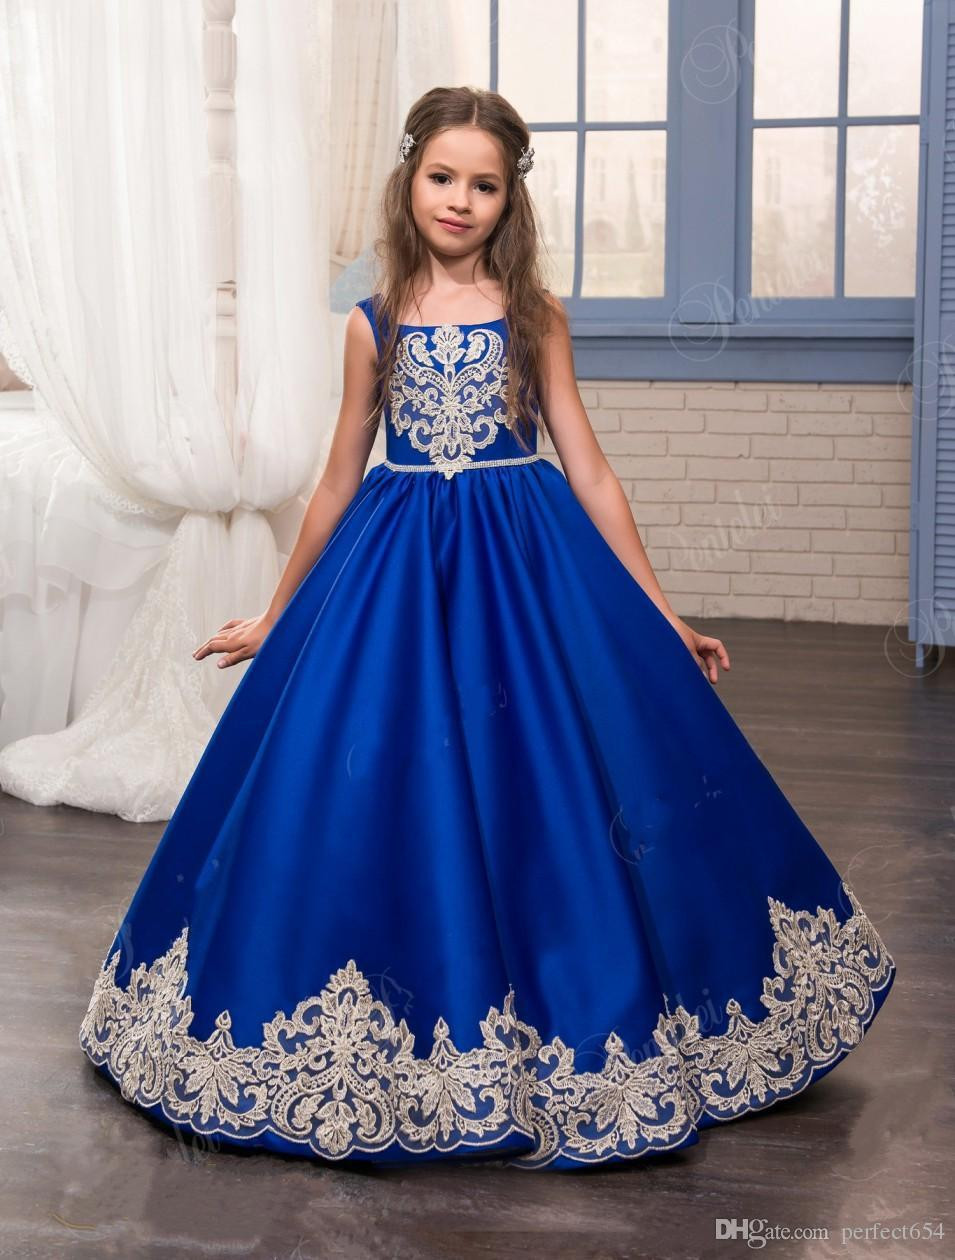 Kids Birthday Party Dress
 Kids Christmas Dresses For Party 2017 Royal Blue Girl